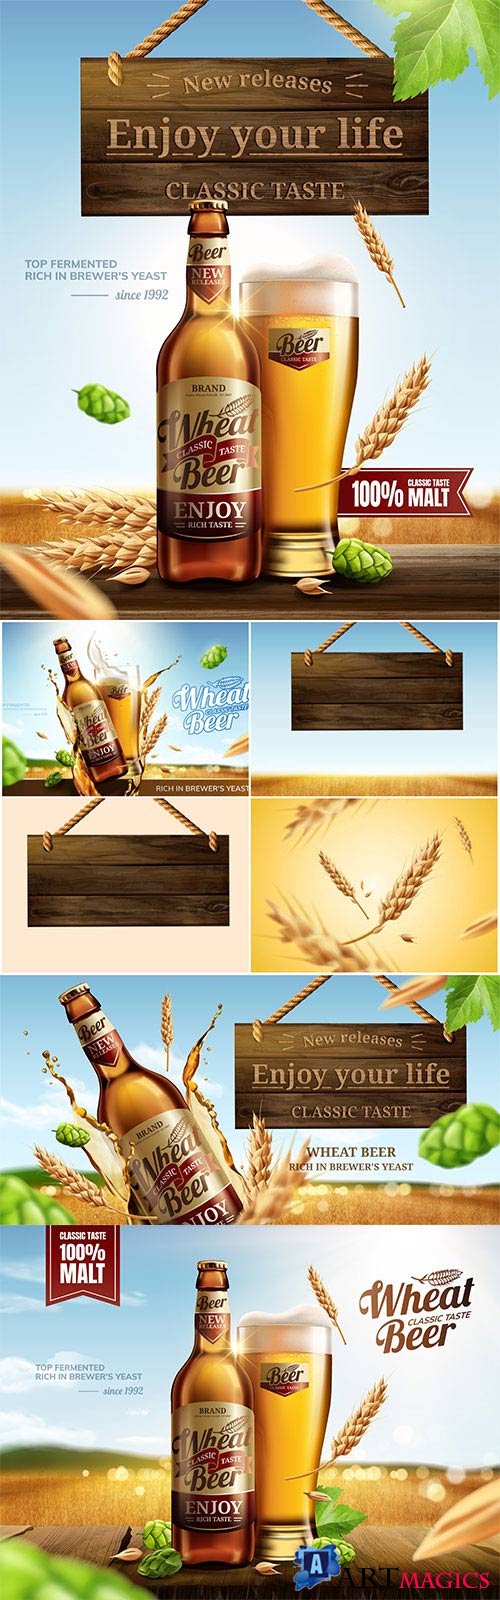 Attractive glass bottle wheat beer in 3d vector illustration